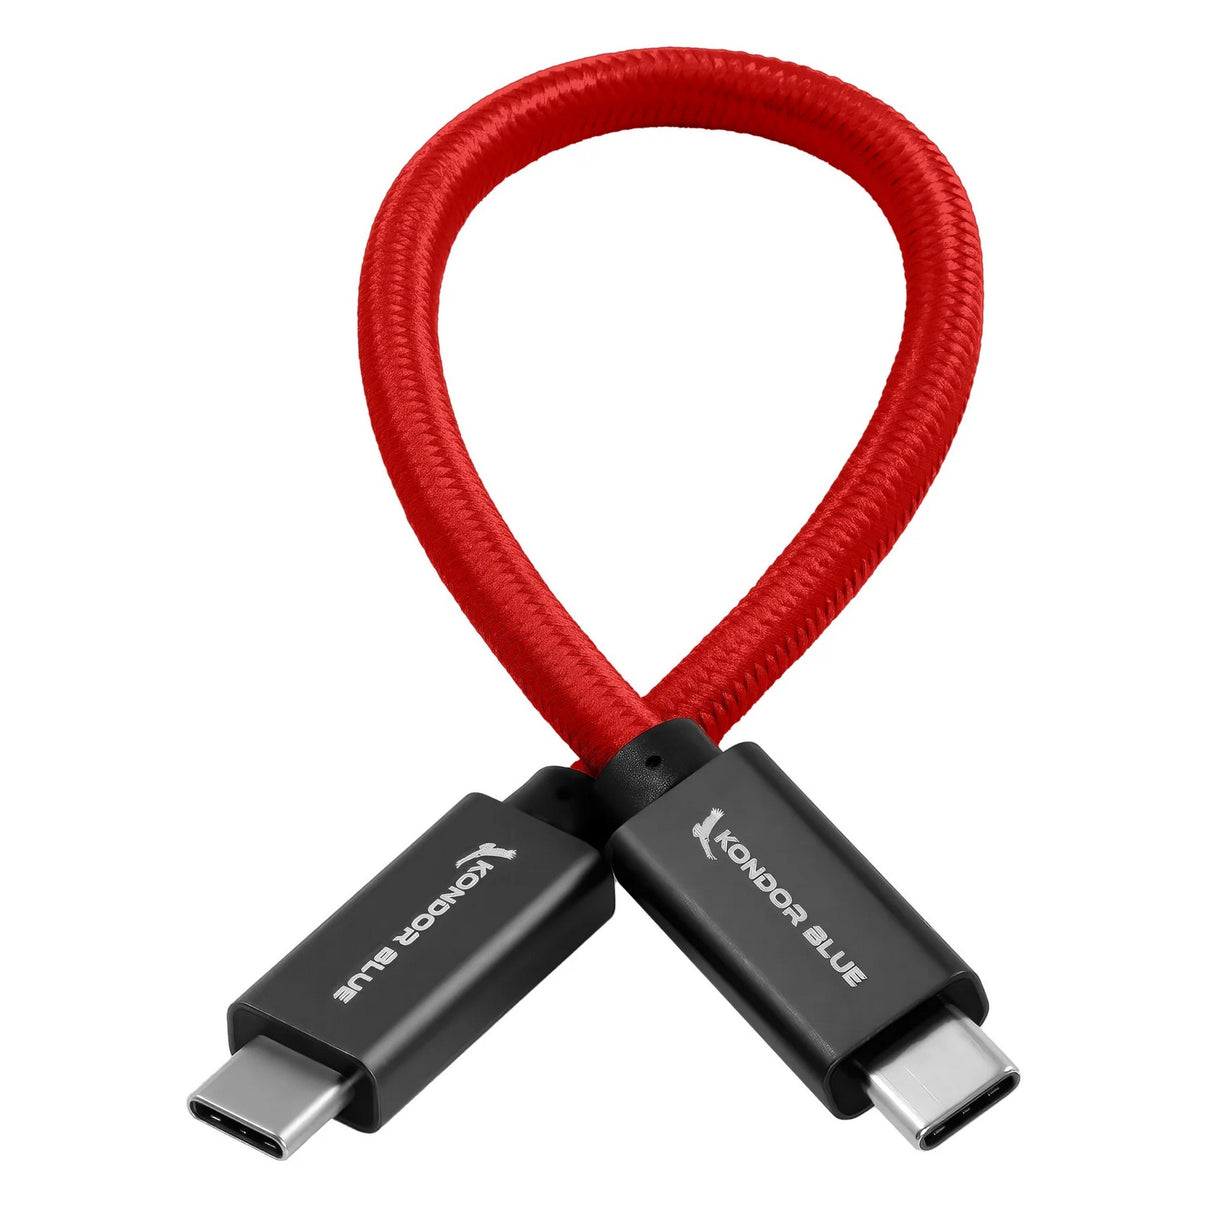 Kondor Blue USB C to USB C High Speed Cable for SSD Recording, Cardinal Red